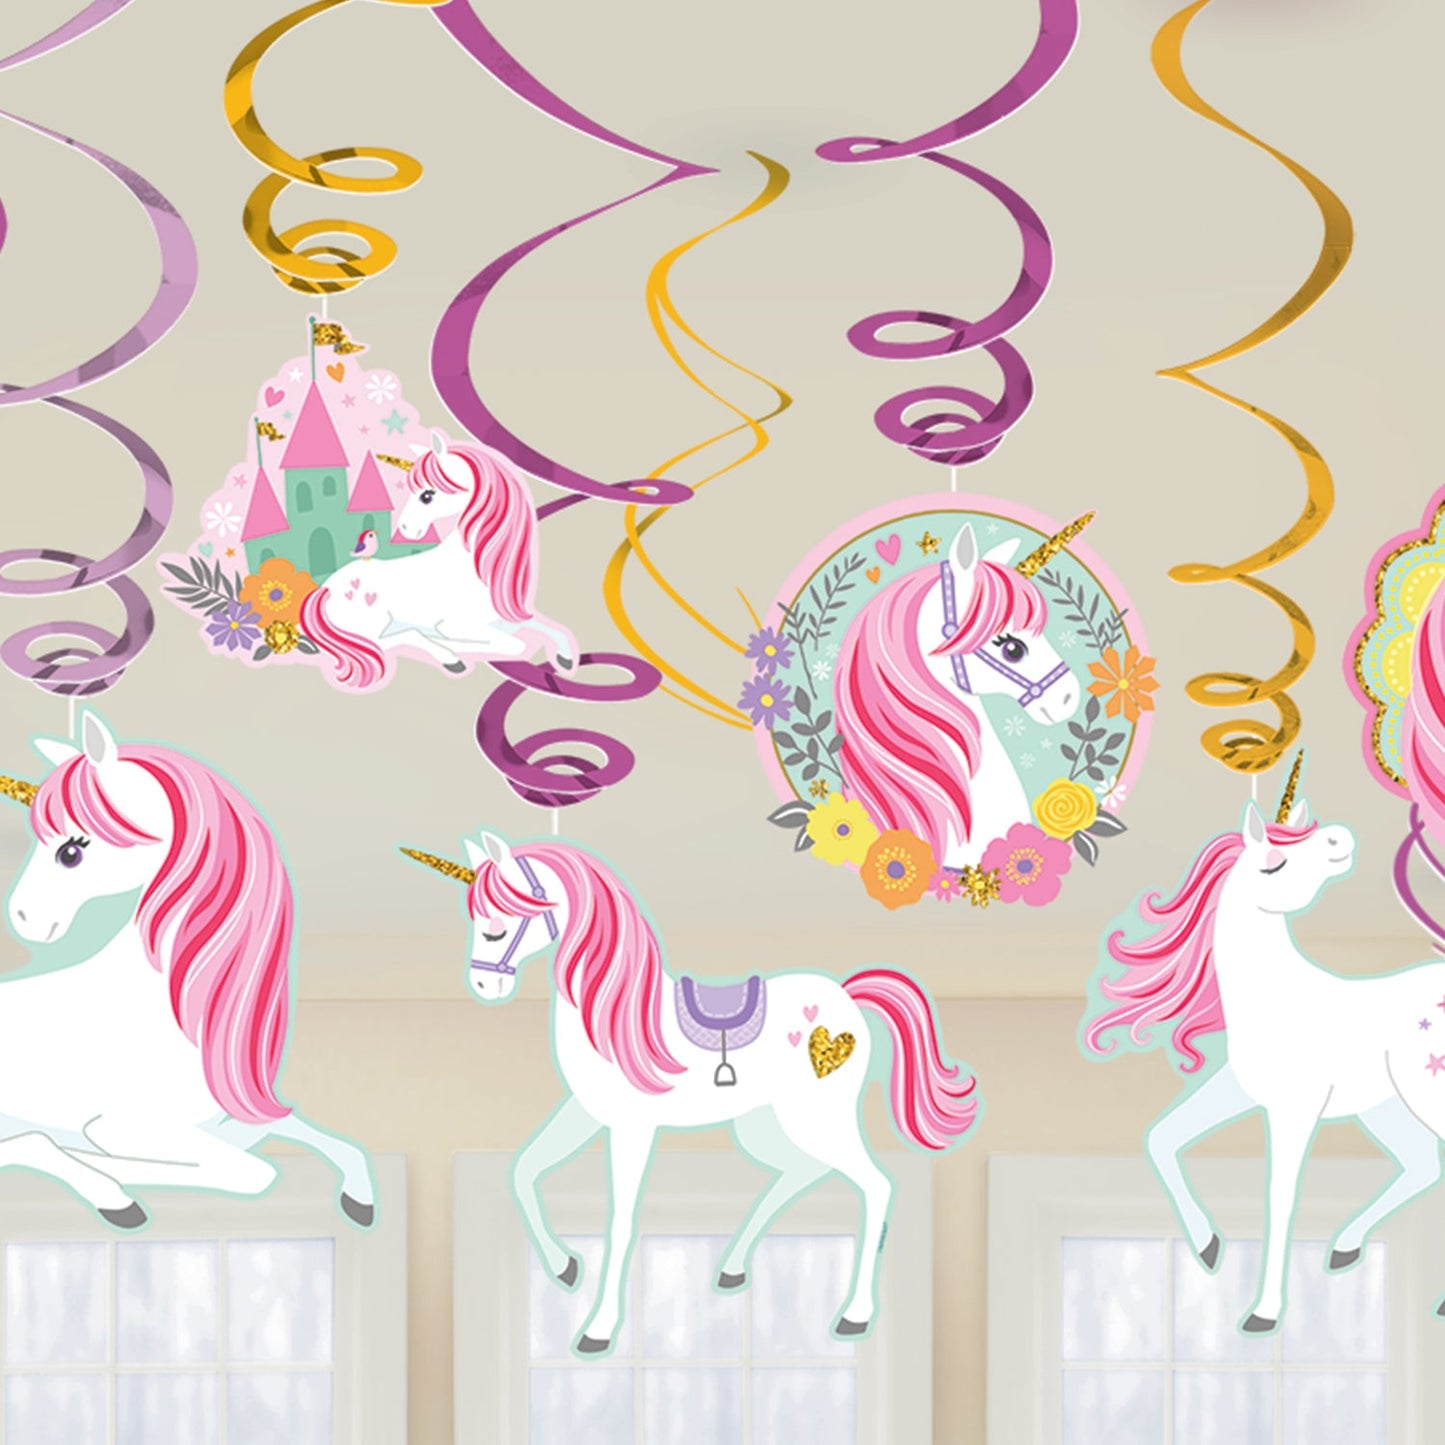 Magical Unicorn Hanging Swirl Decorations contains 6 Foil Swirls 45cm, 6 Foil Swirls 60cm with Cut-outs